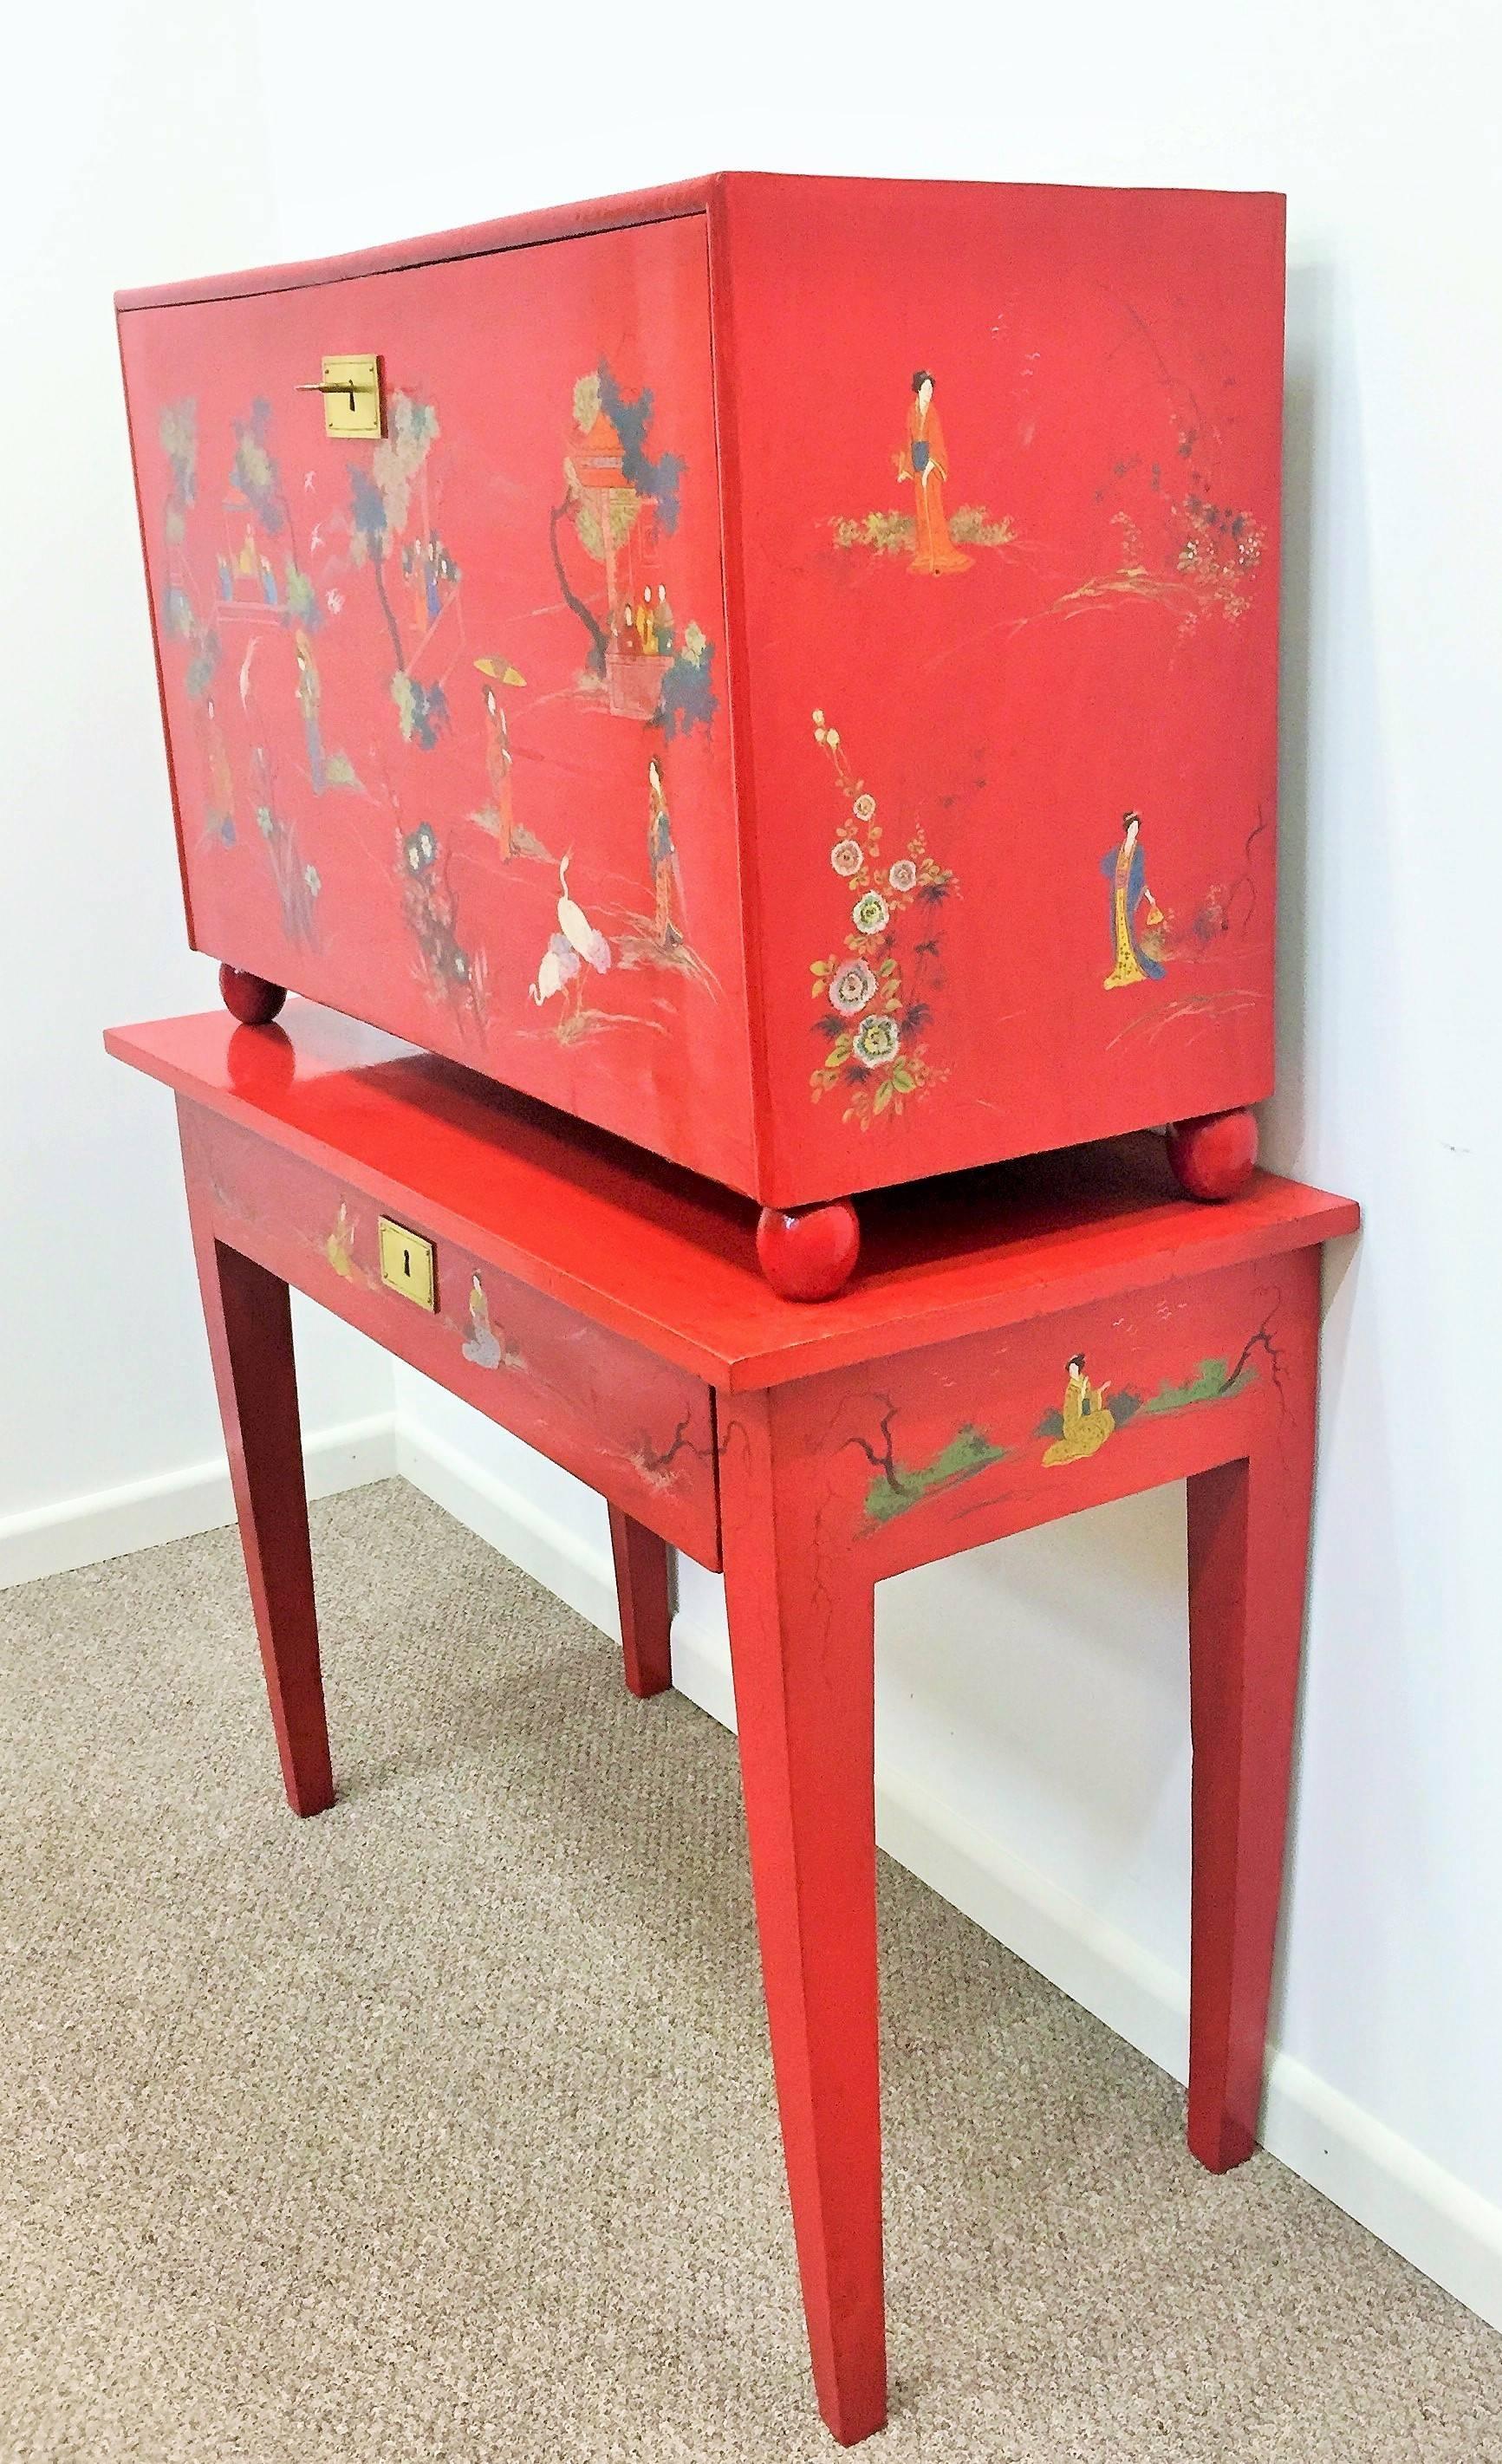 20th century red lacquer barqueno with Japanese style design. Fine painted motif in gold gilt, brass fitting, beautiful color form and detail.